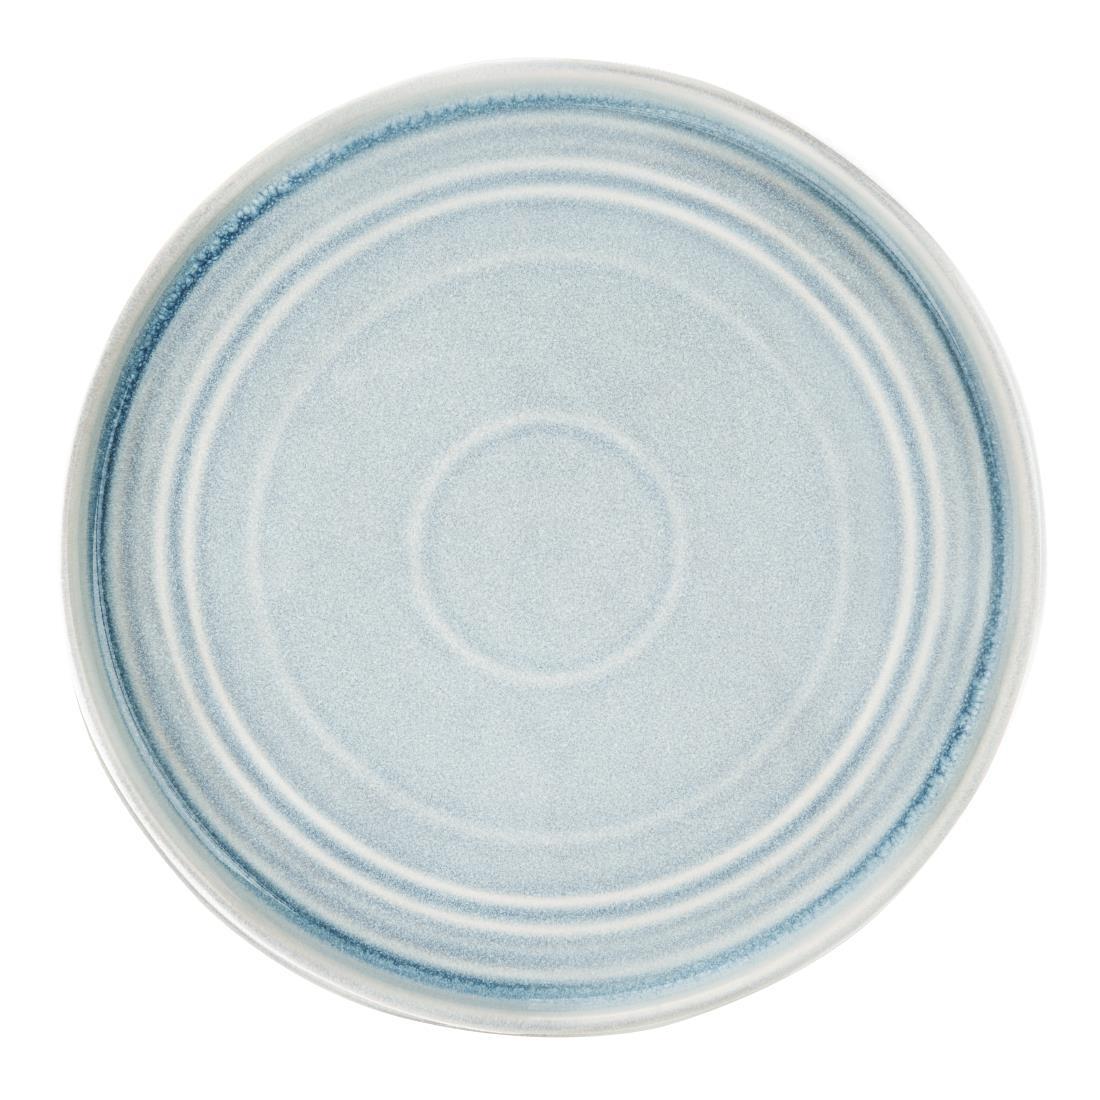 Olympia Cavolo Flat Round Plates Ice Blue 270mm (Pack of 4) - FB569  - 1